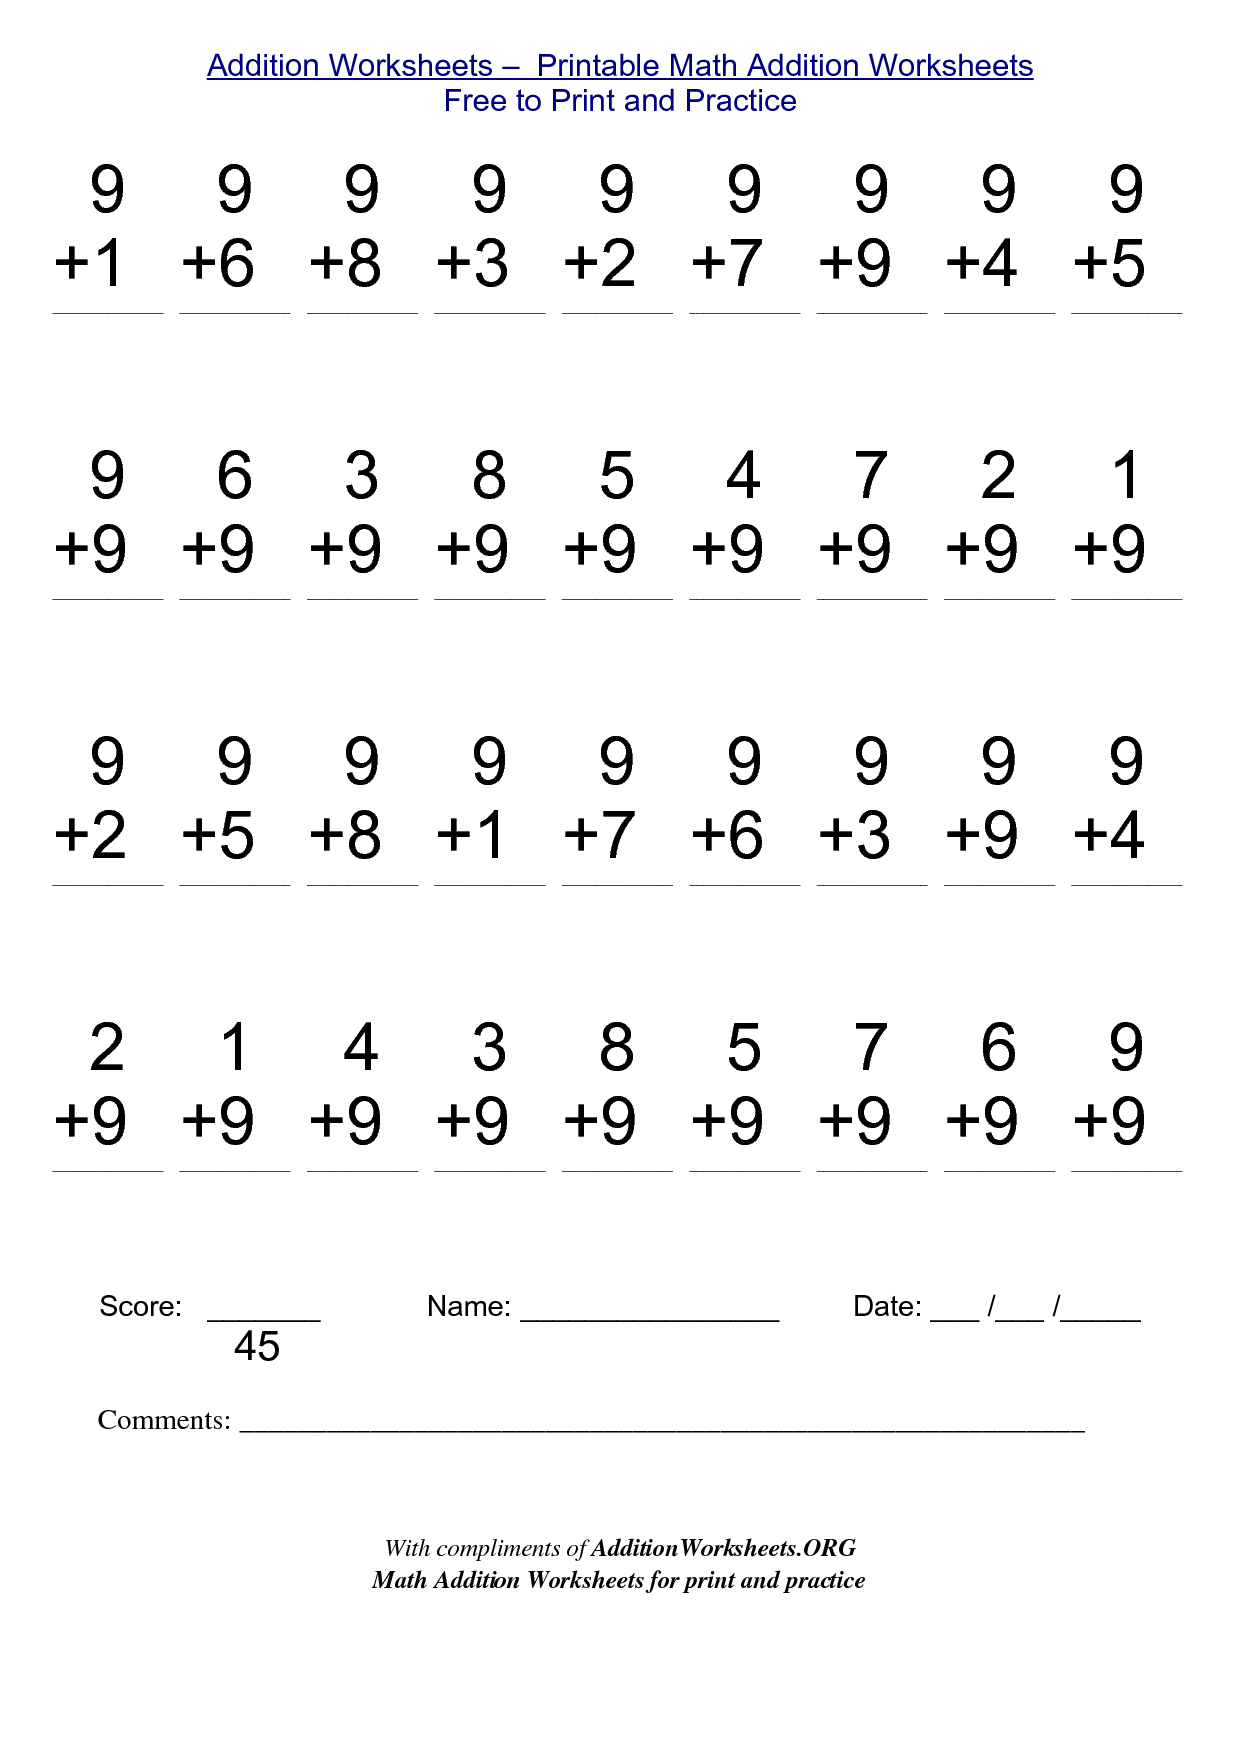 Math Worksheets For Free To Print - Alot | Me | Math Worksheets - Free Printable Activity Sheets For 2Nd Grade